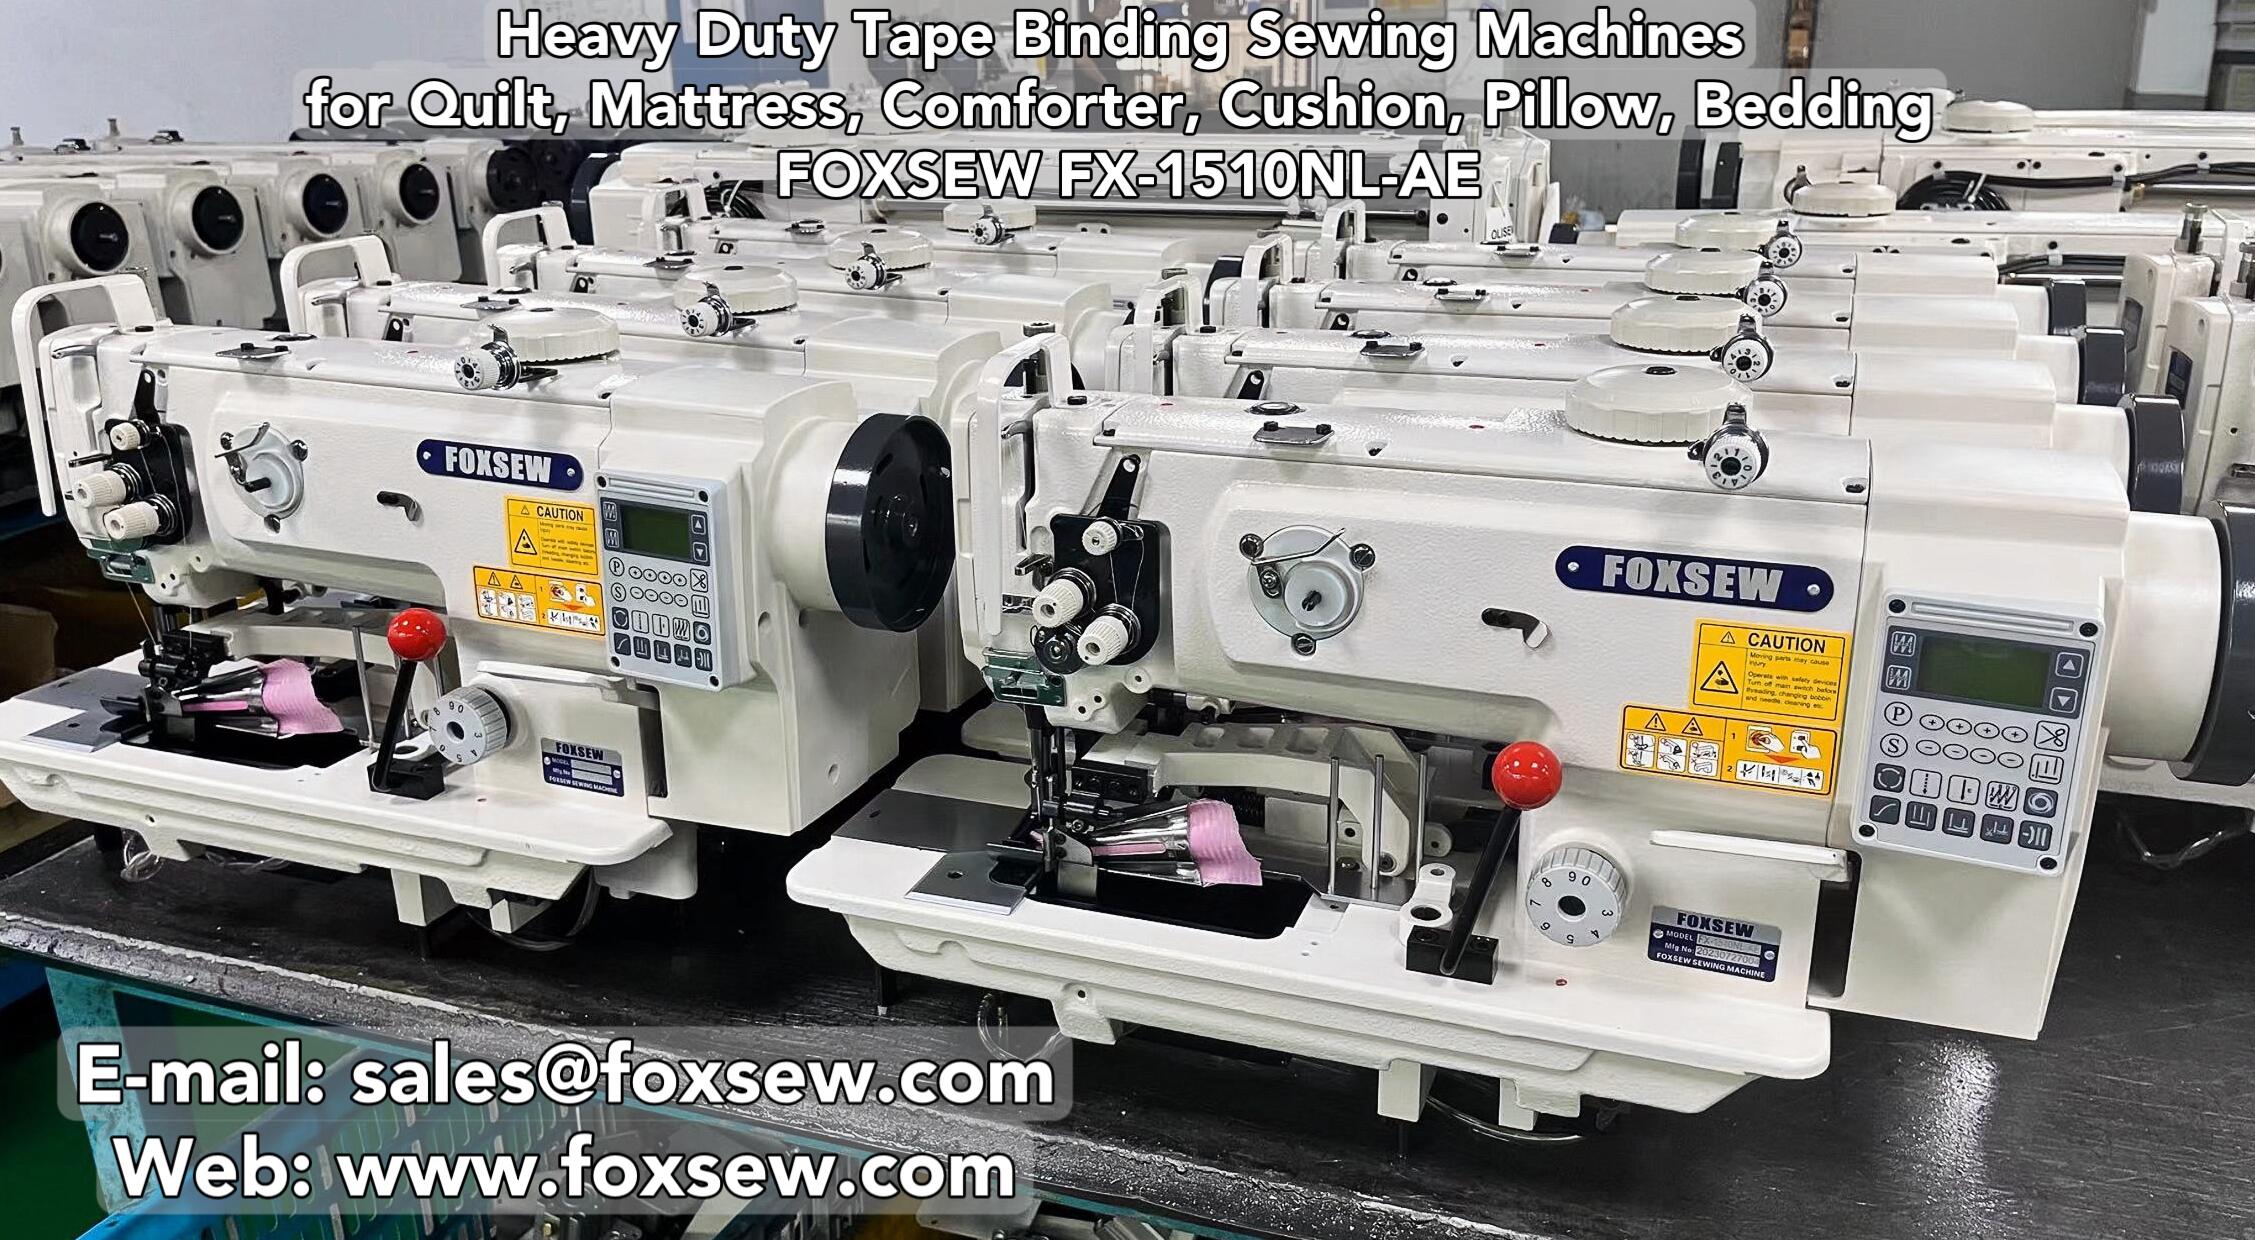 Heavy Duty Tape Binding Sewing Machines for Mattress Quilts Comformers FOXSEW FX-1510NL-AE -2